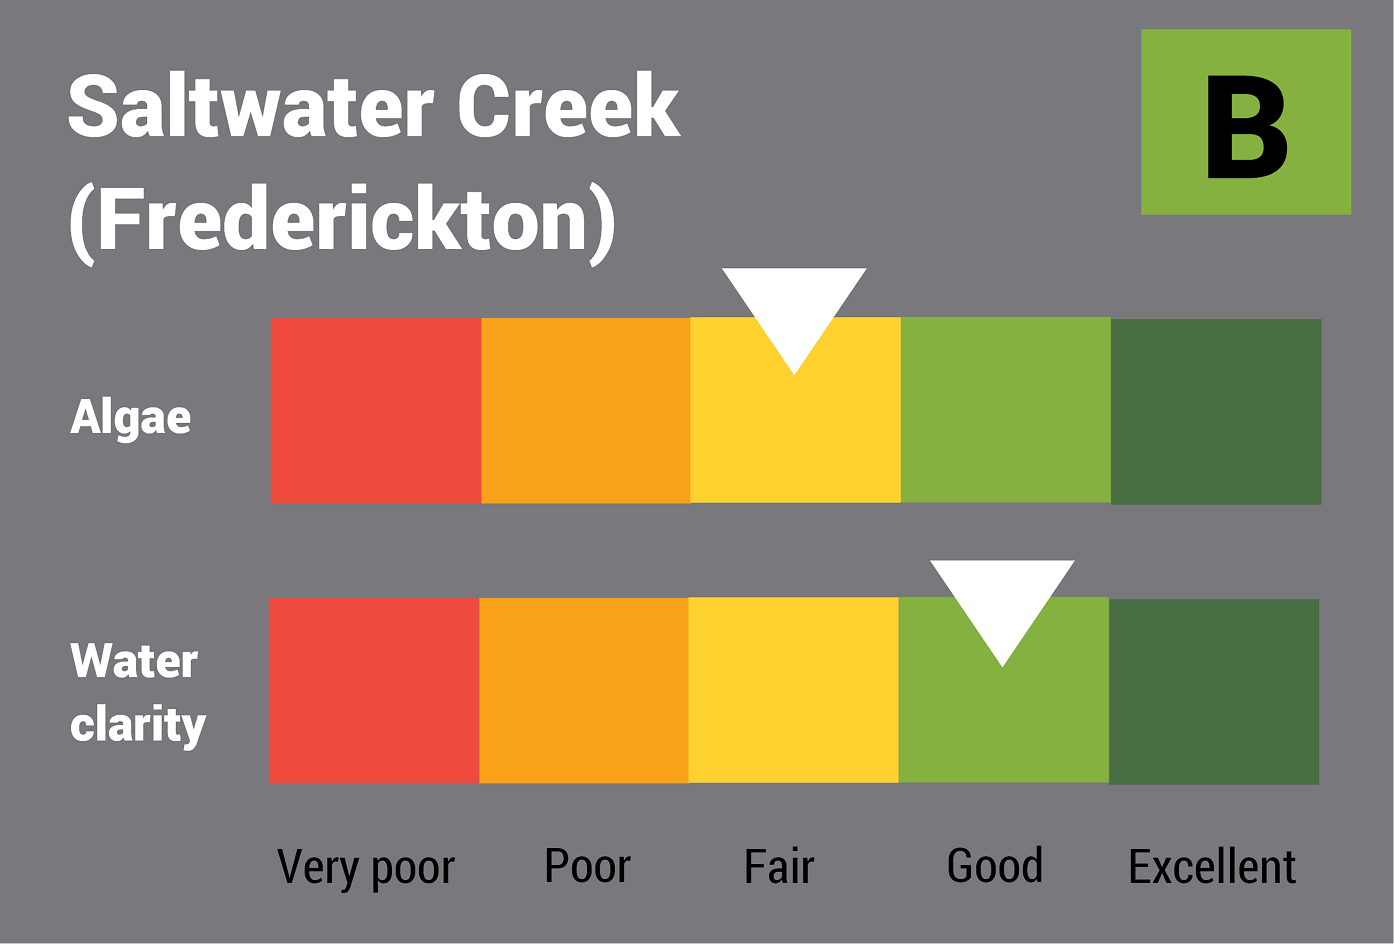 Saltwater Creek (Frederickton) water quality report card for algae and water clarity showing colour-coded ratings (red, orange, yellow, light green and dark green, which represent very poor, poor, fair, good and excellent, respectively). Algae is rated 'fair' and water clarity is rated 'good' giving an overall rating of 'Good' or 'B'.